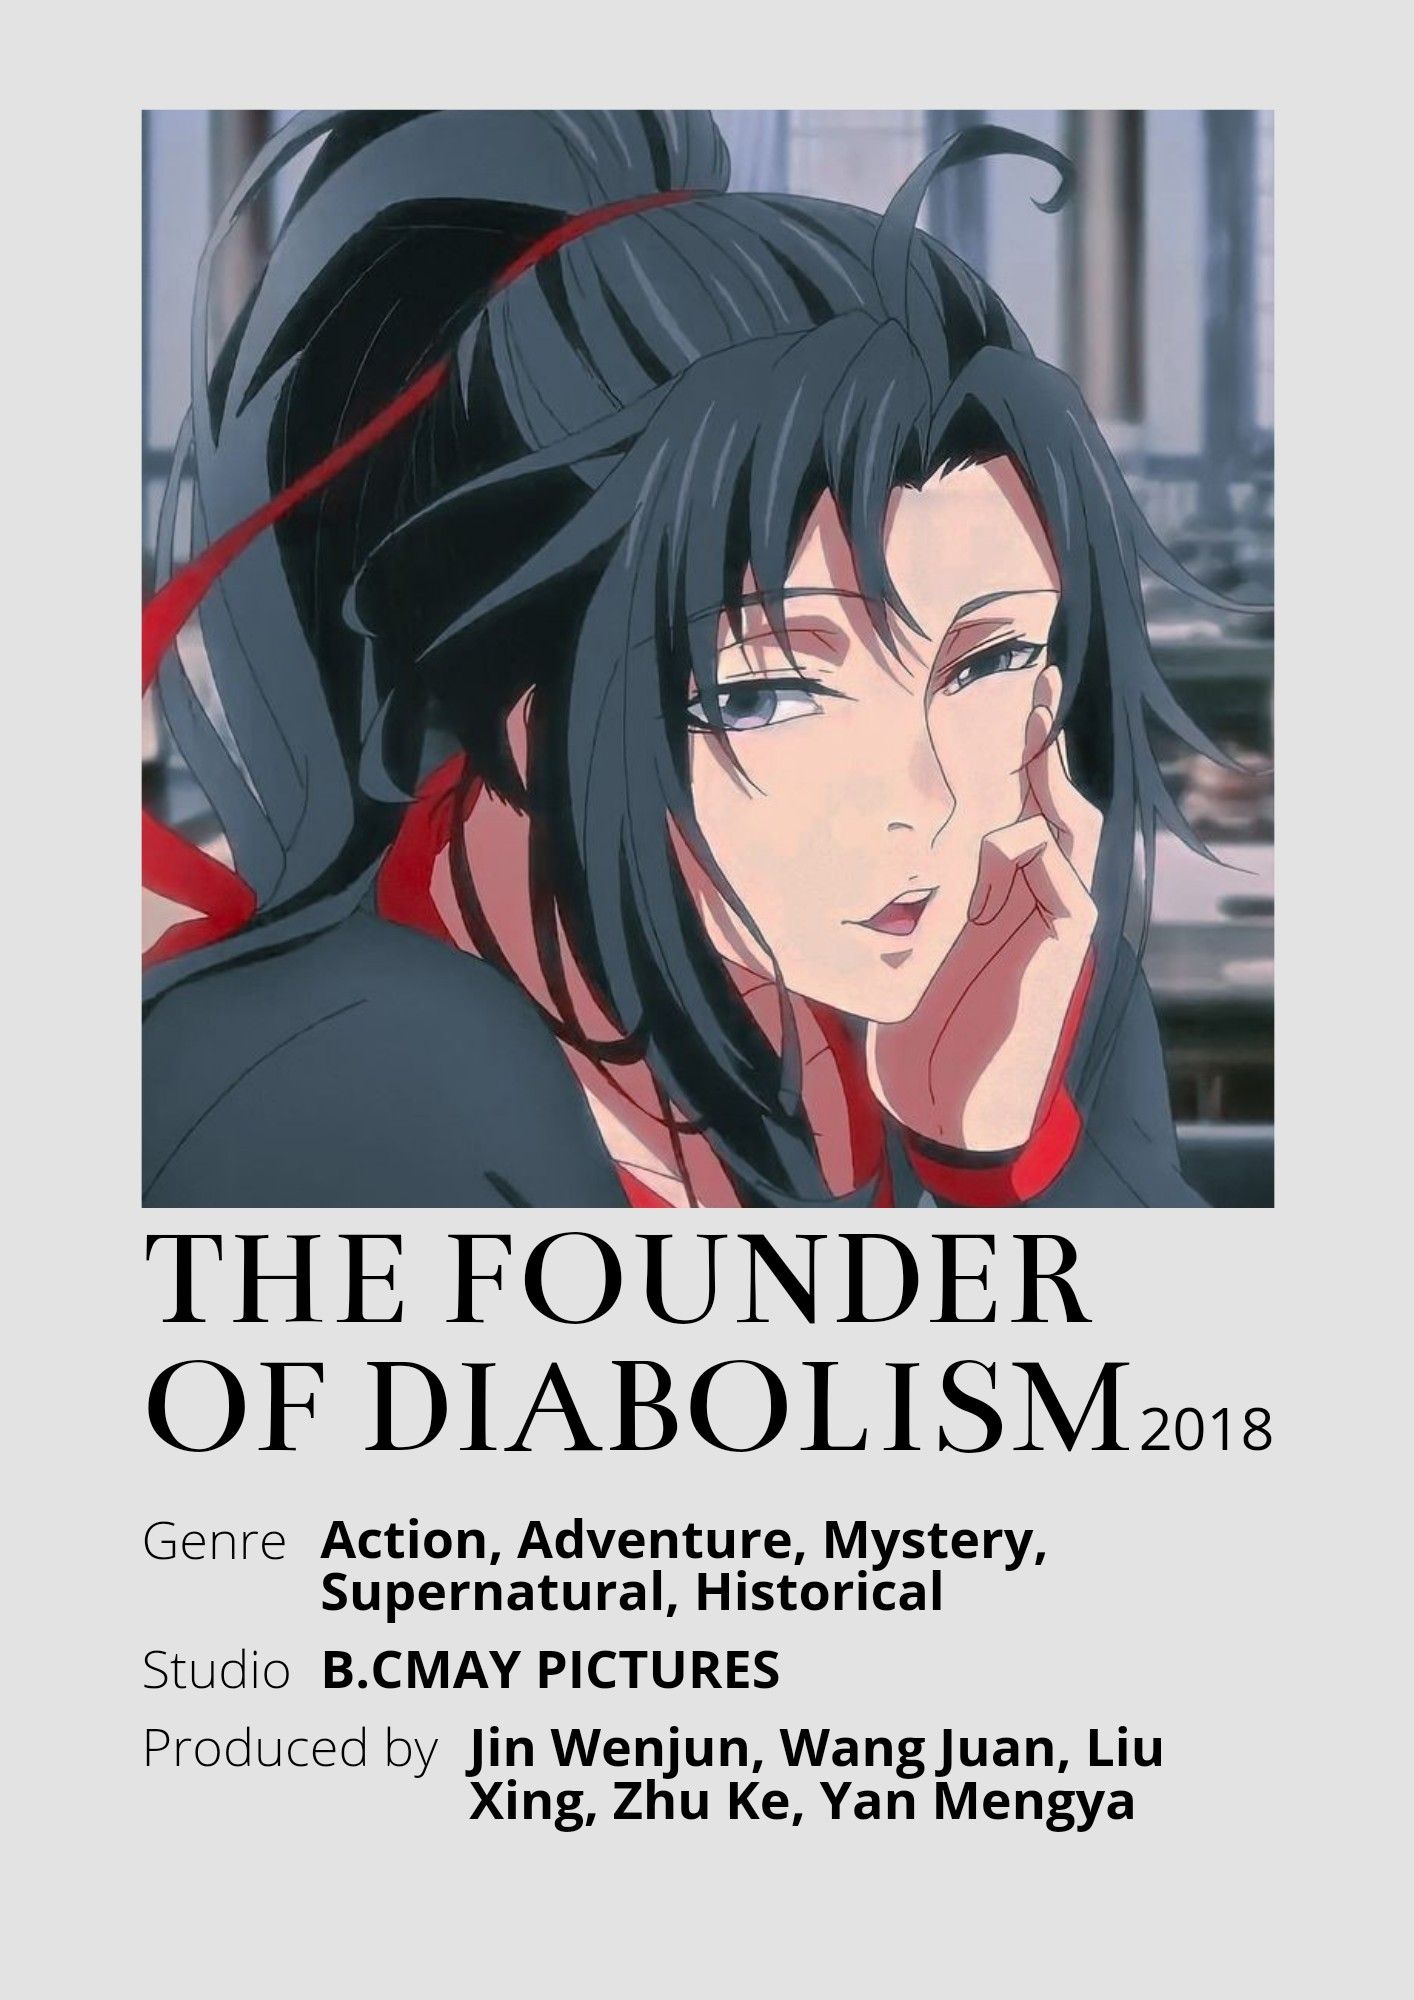 The Founder of Diabolism